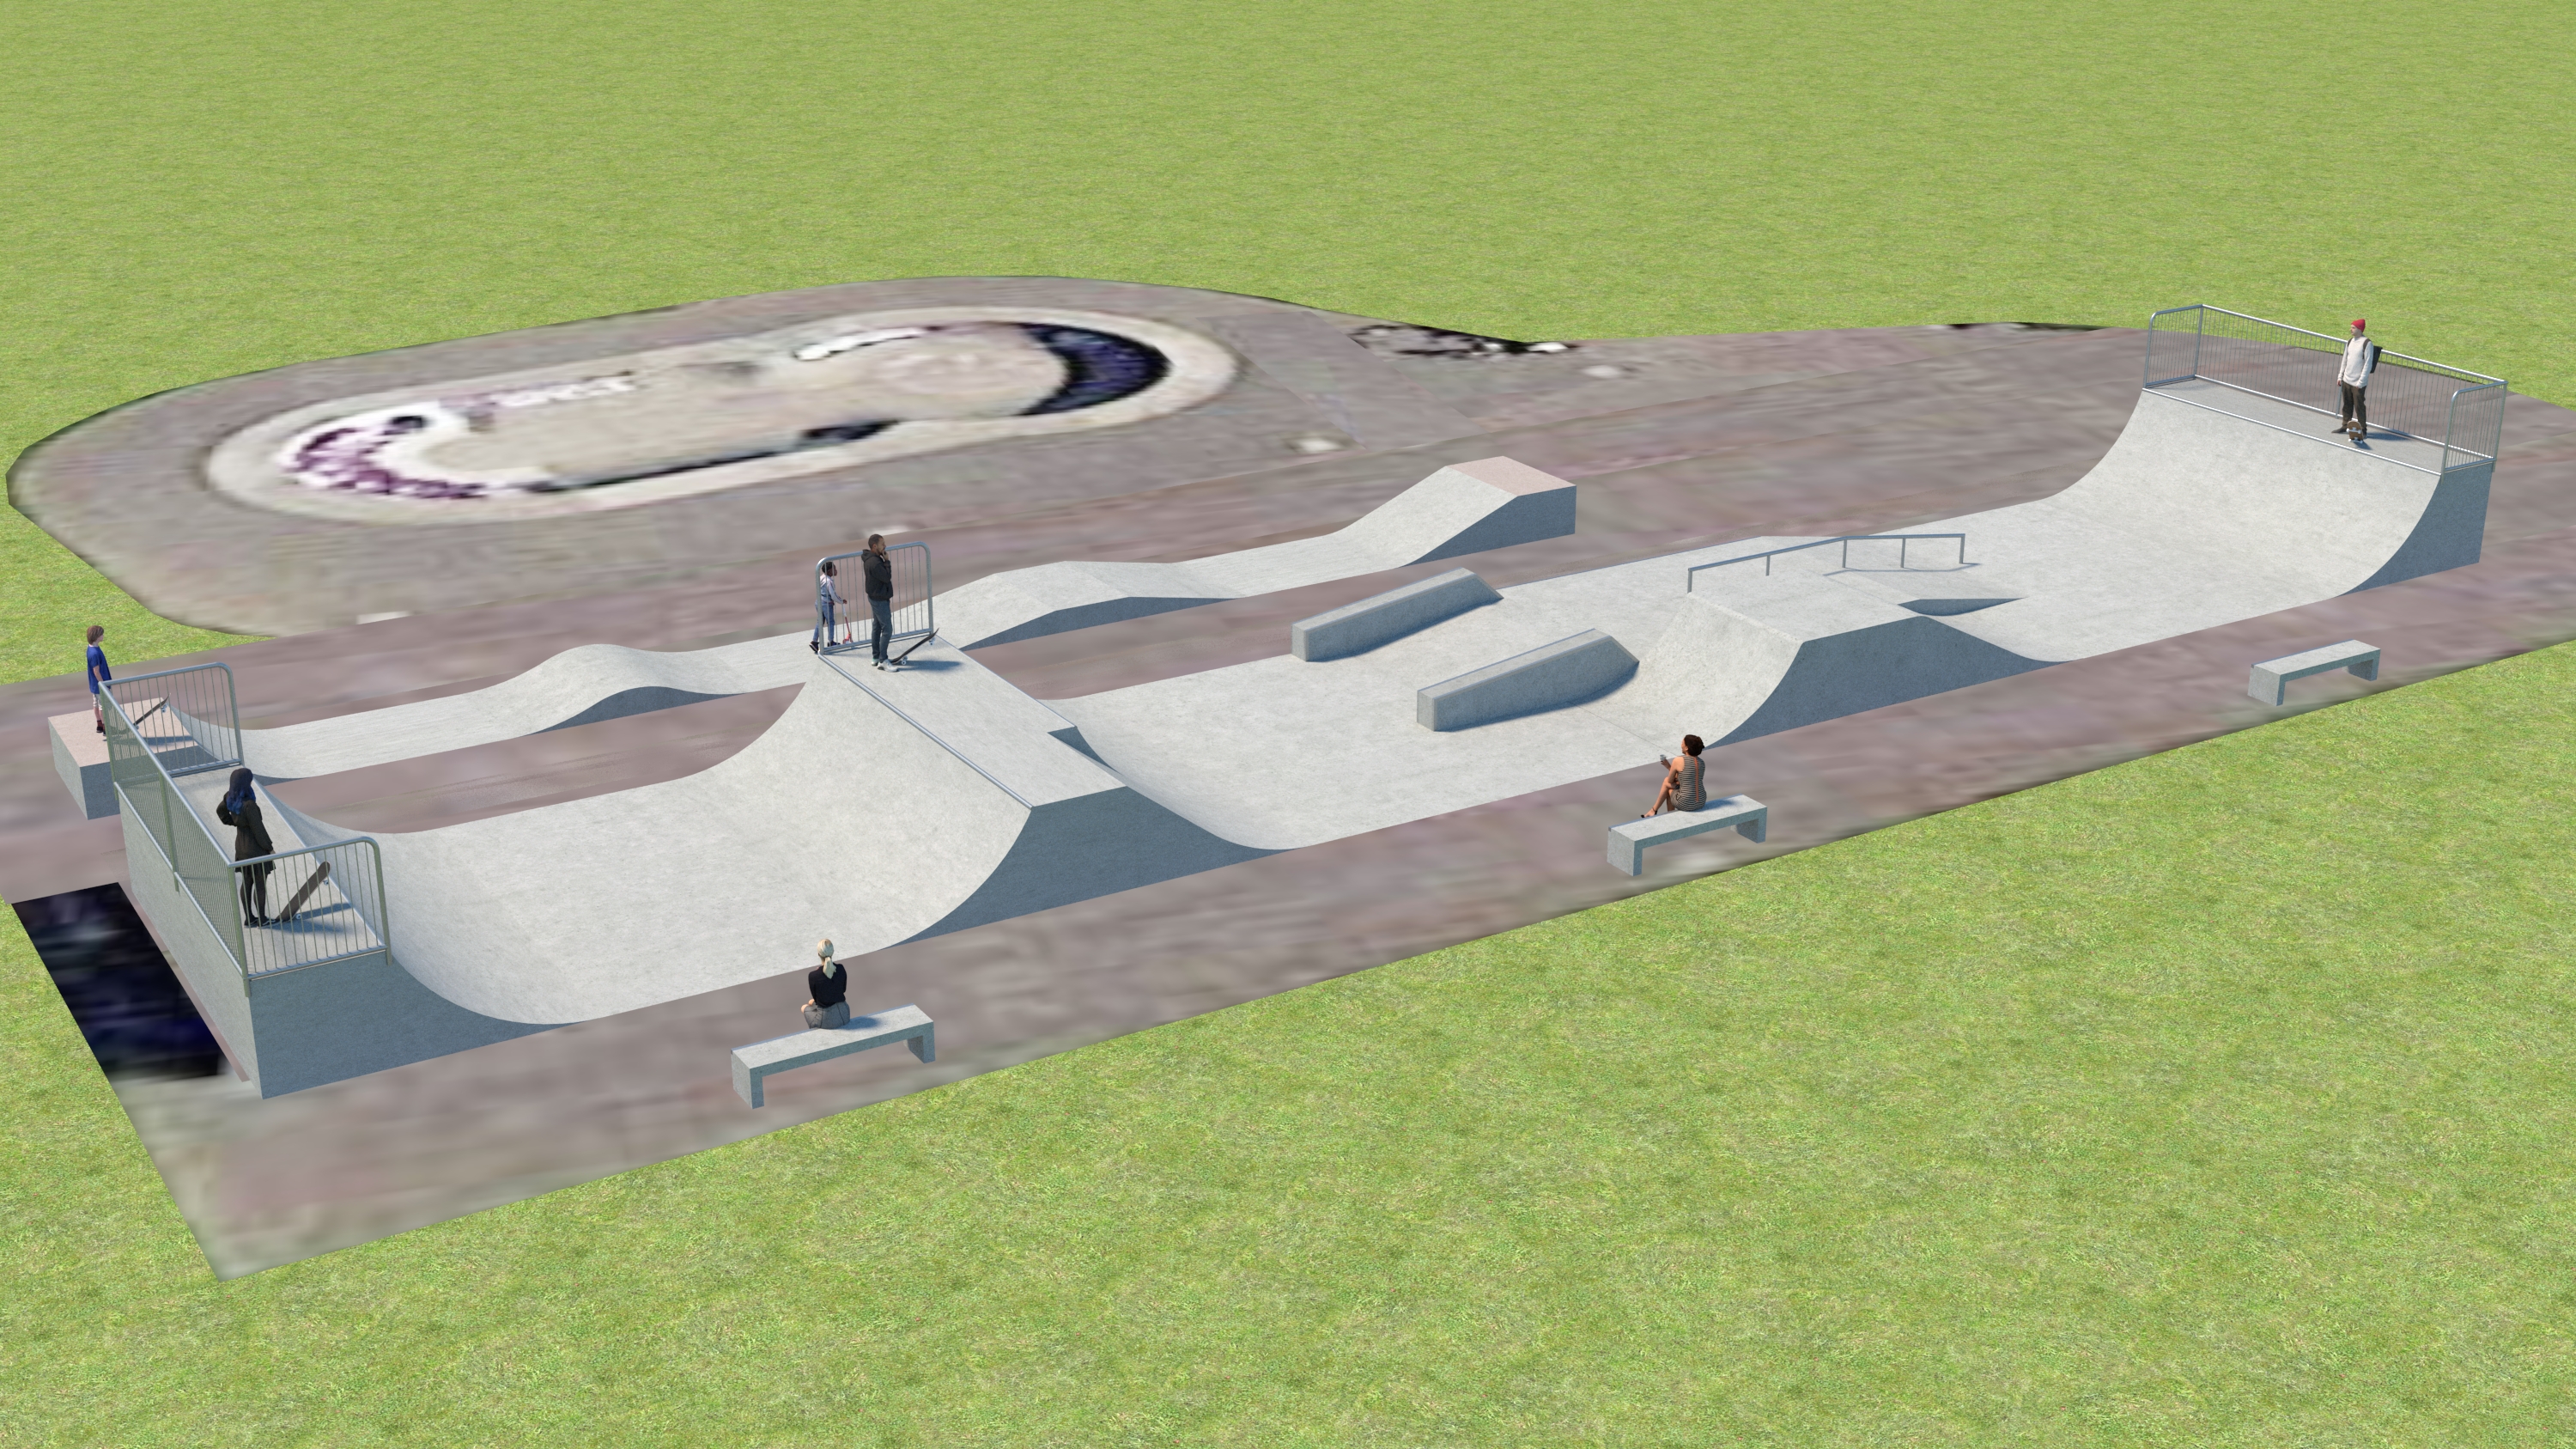 Concept image of full Spa Road skatepark design - different viewpoint